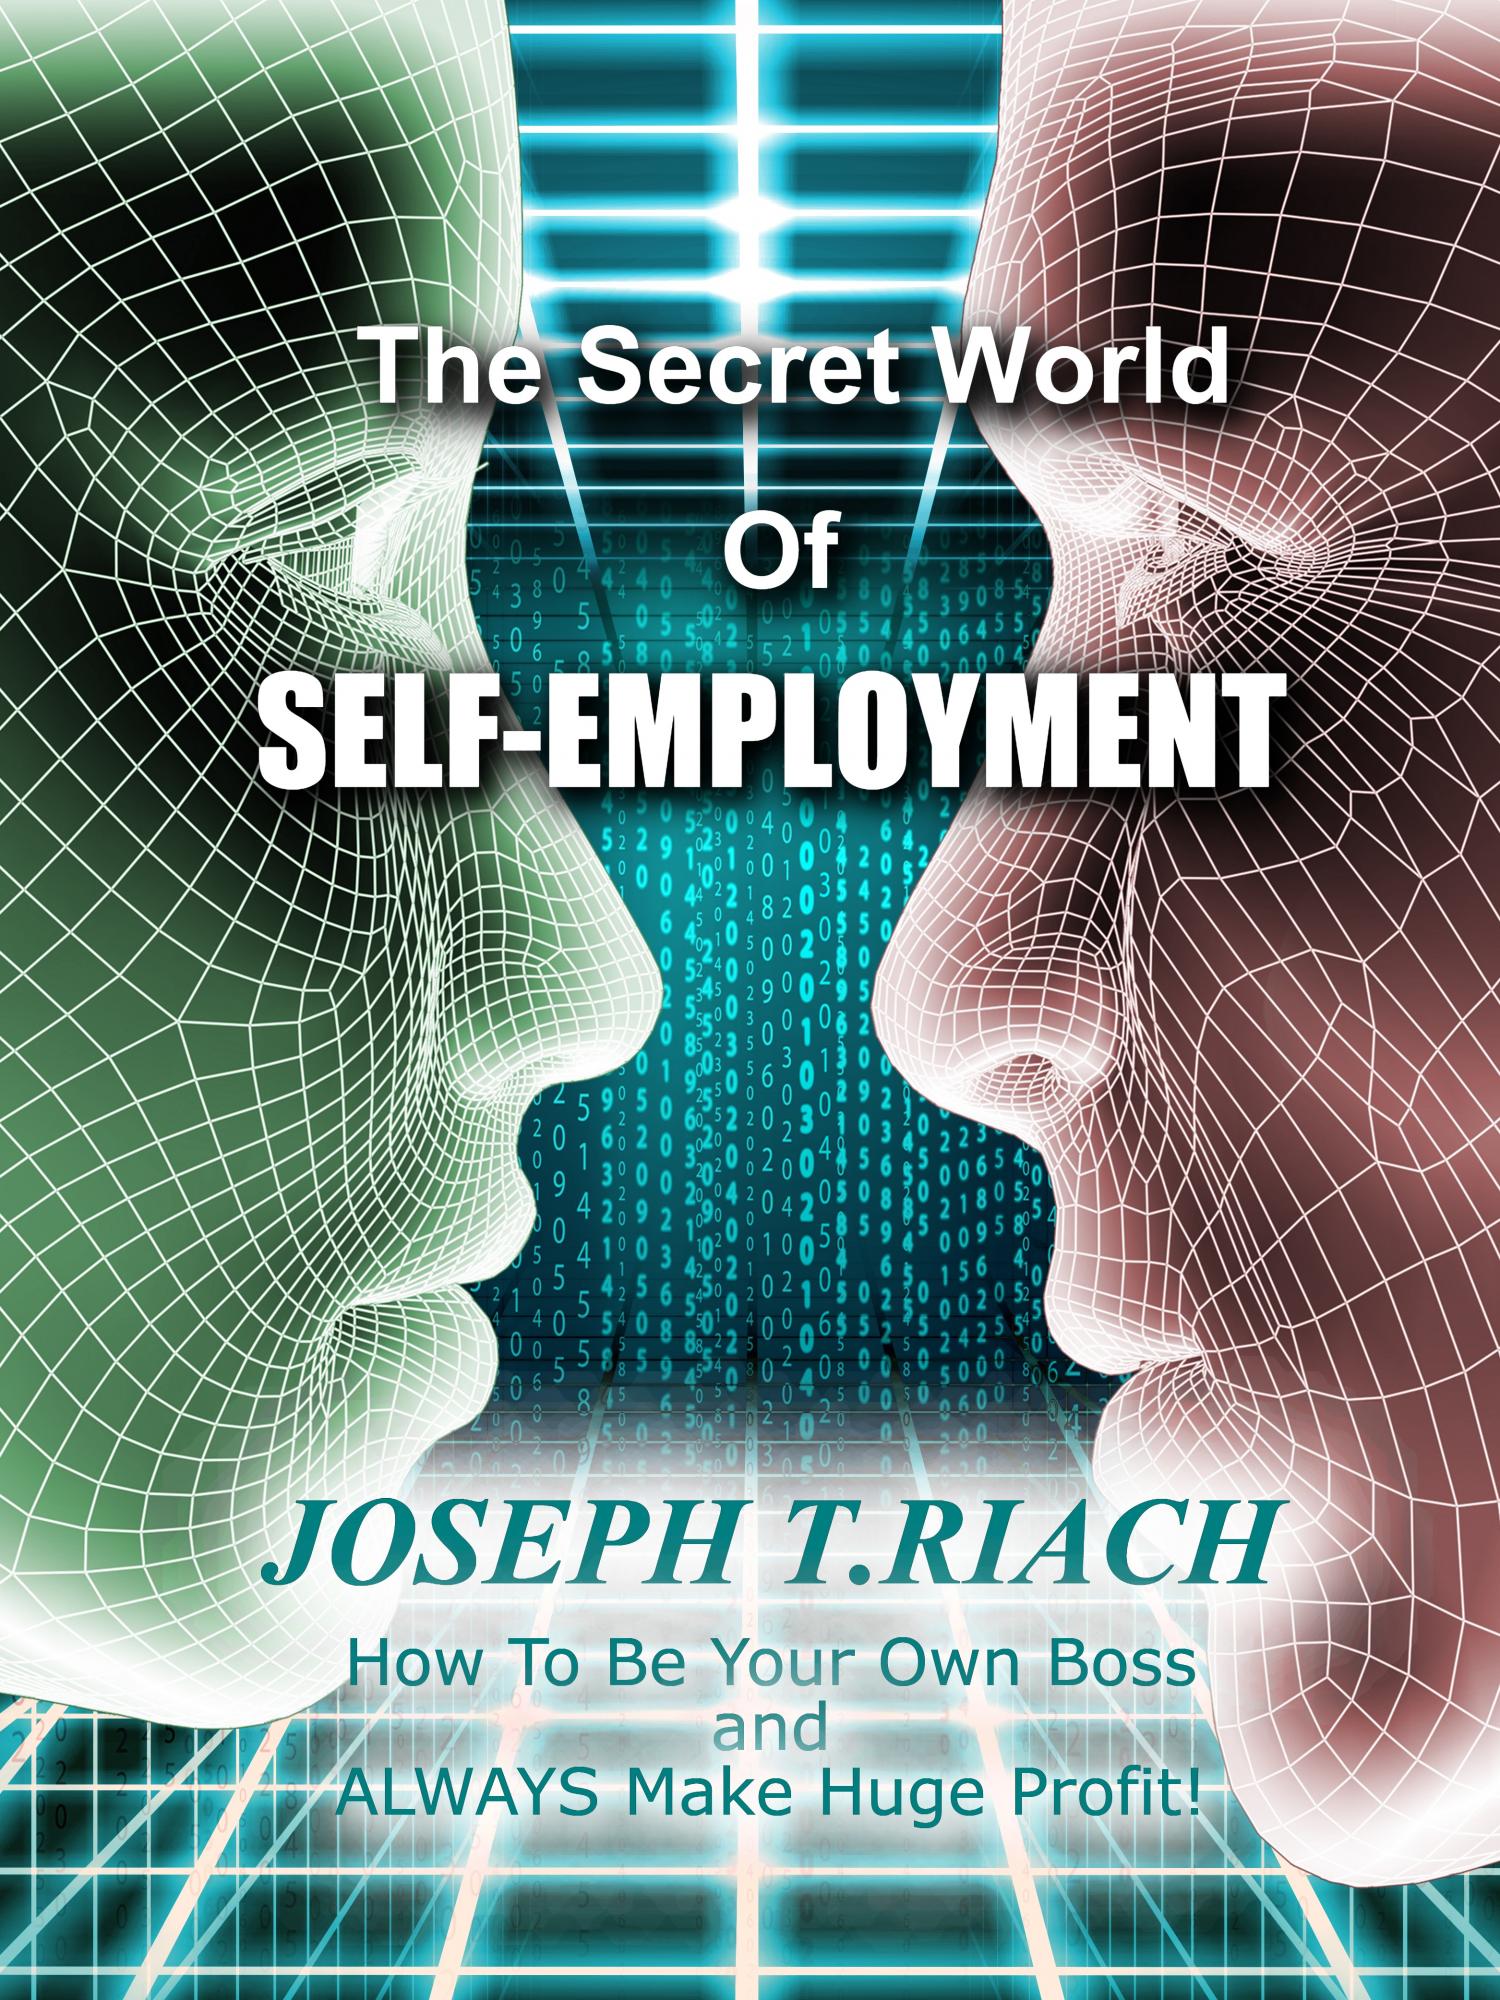 The Secret World Of Self-Employment, personal achievement paperback and ebook written by Joseph Tom Riach